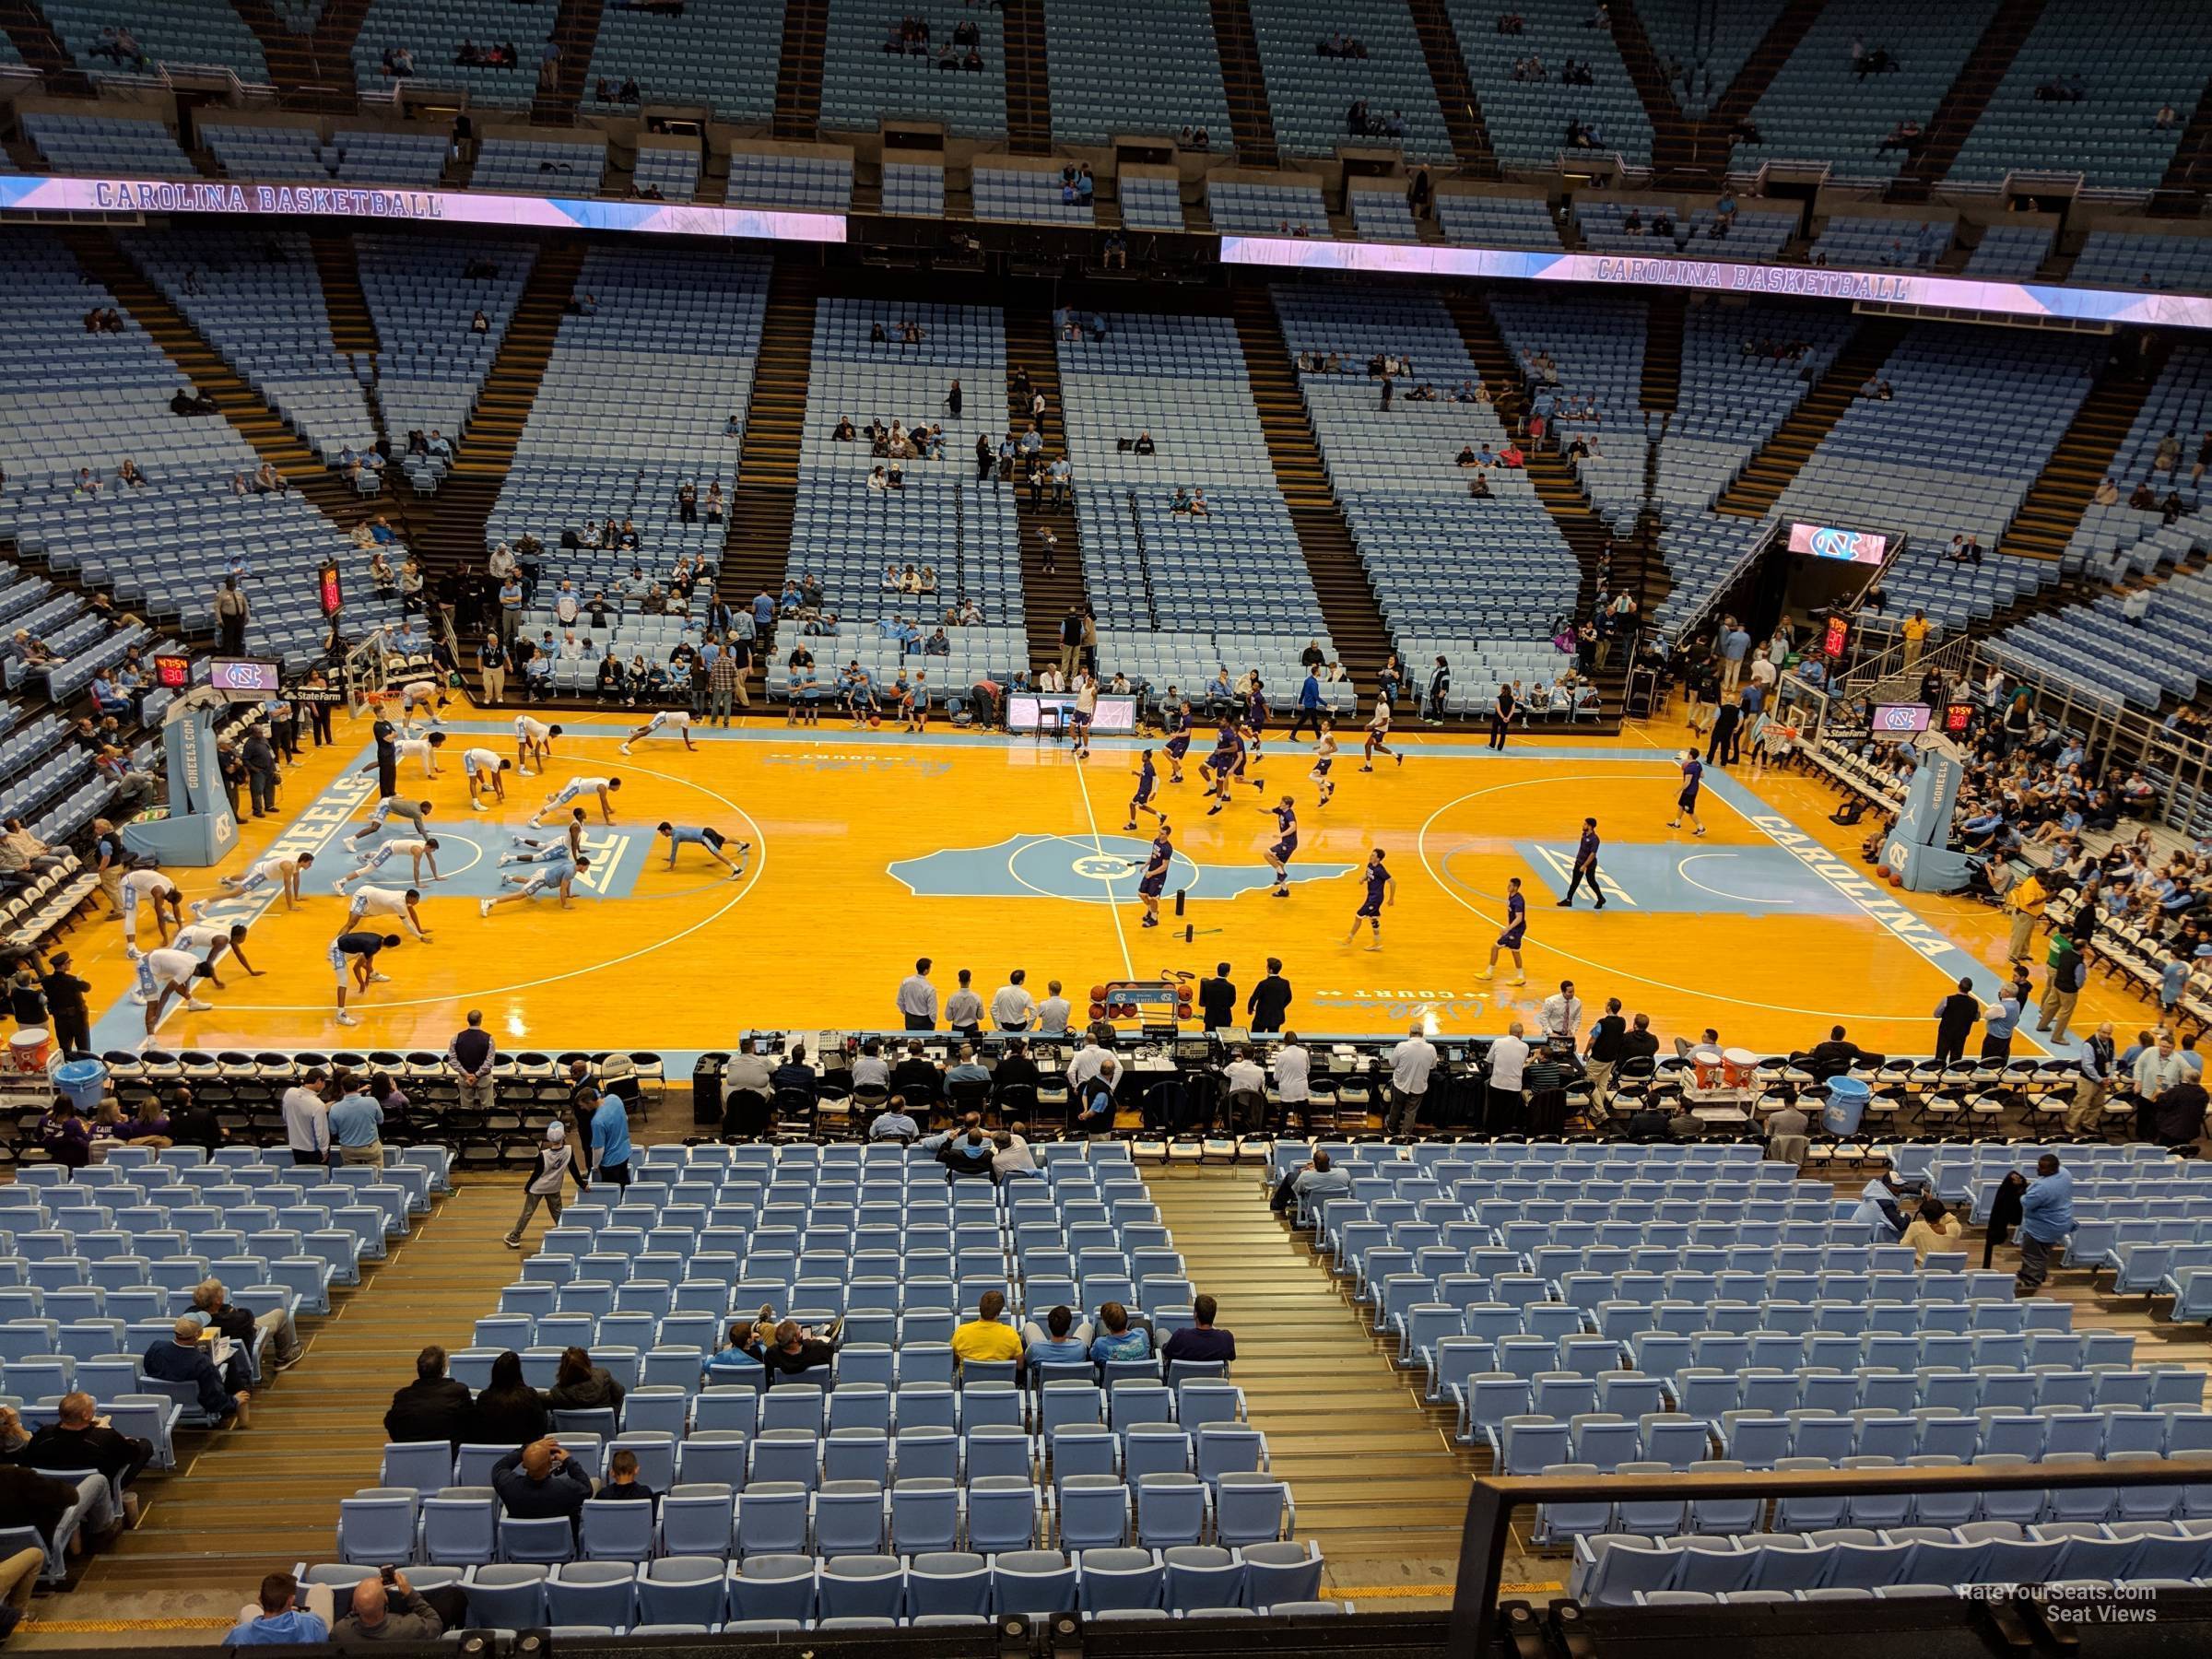 section 208, row c seat view  - dean smith center